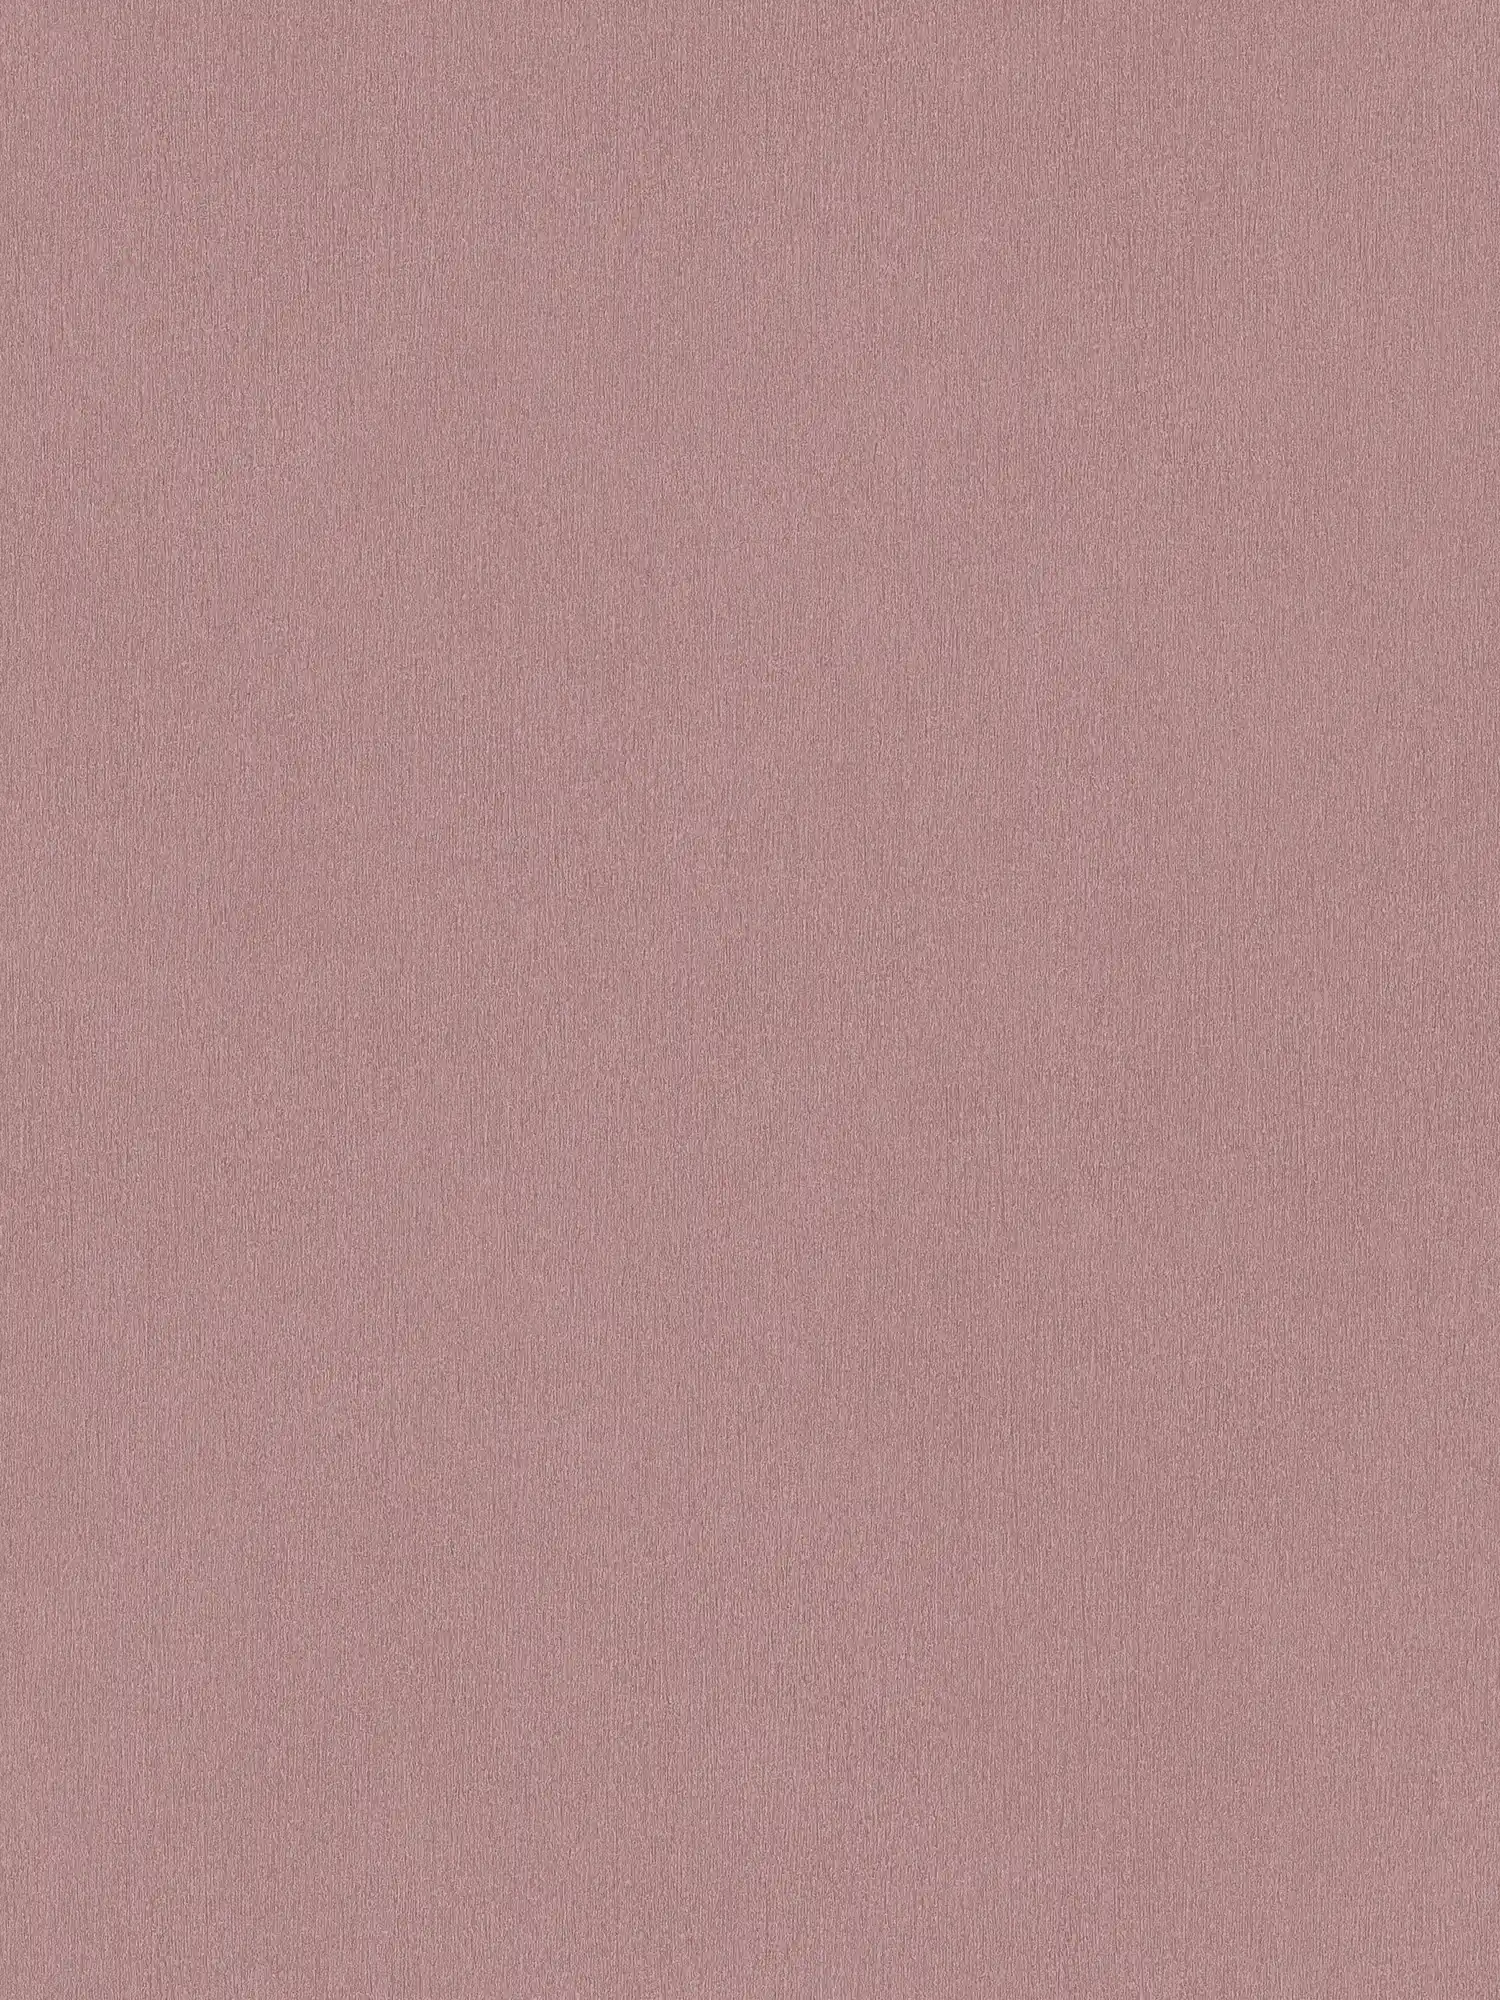 Plain wallpaper old pink with colour hatching
